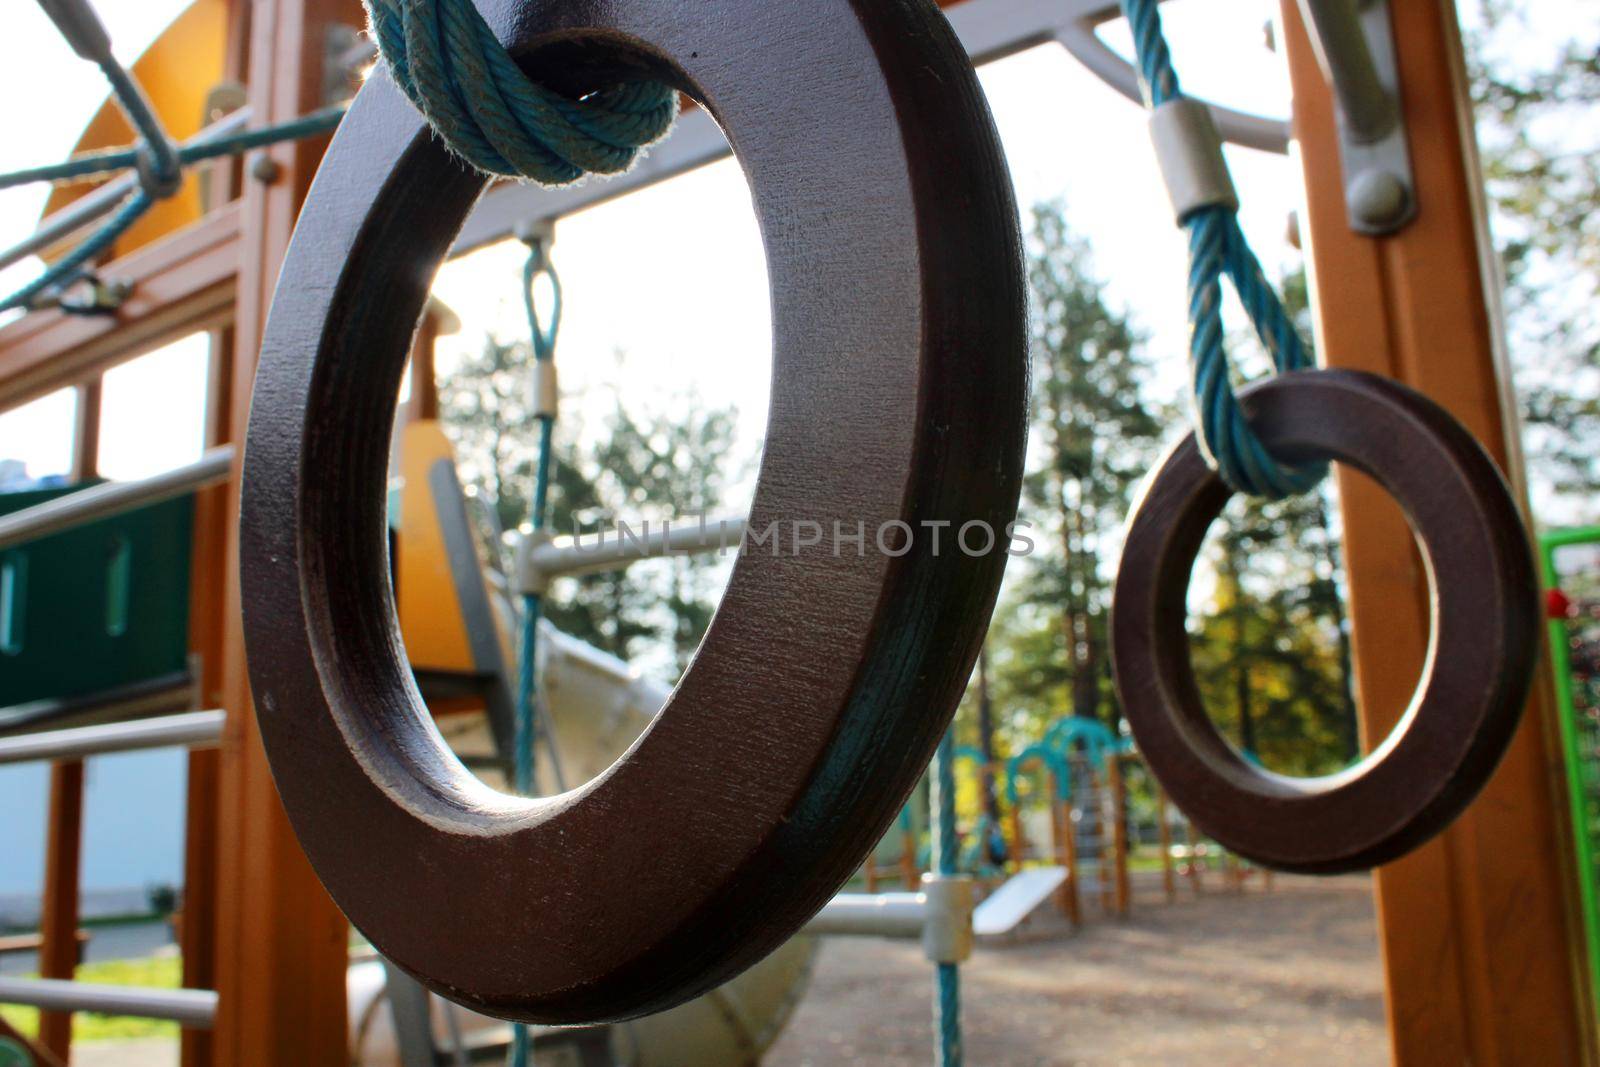 Gymnastic rings close-up on a children's outdoor playground. Healthy lifestyle concept